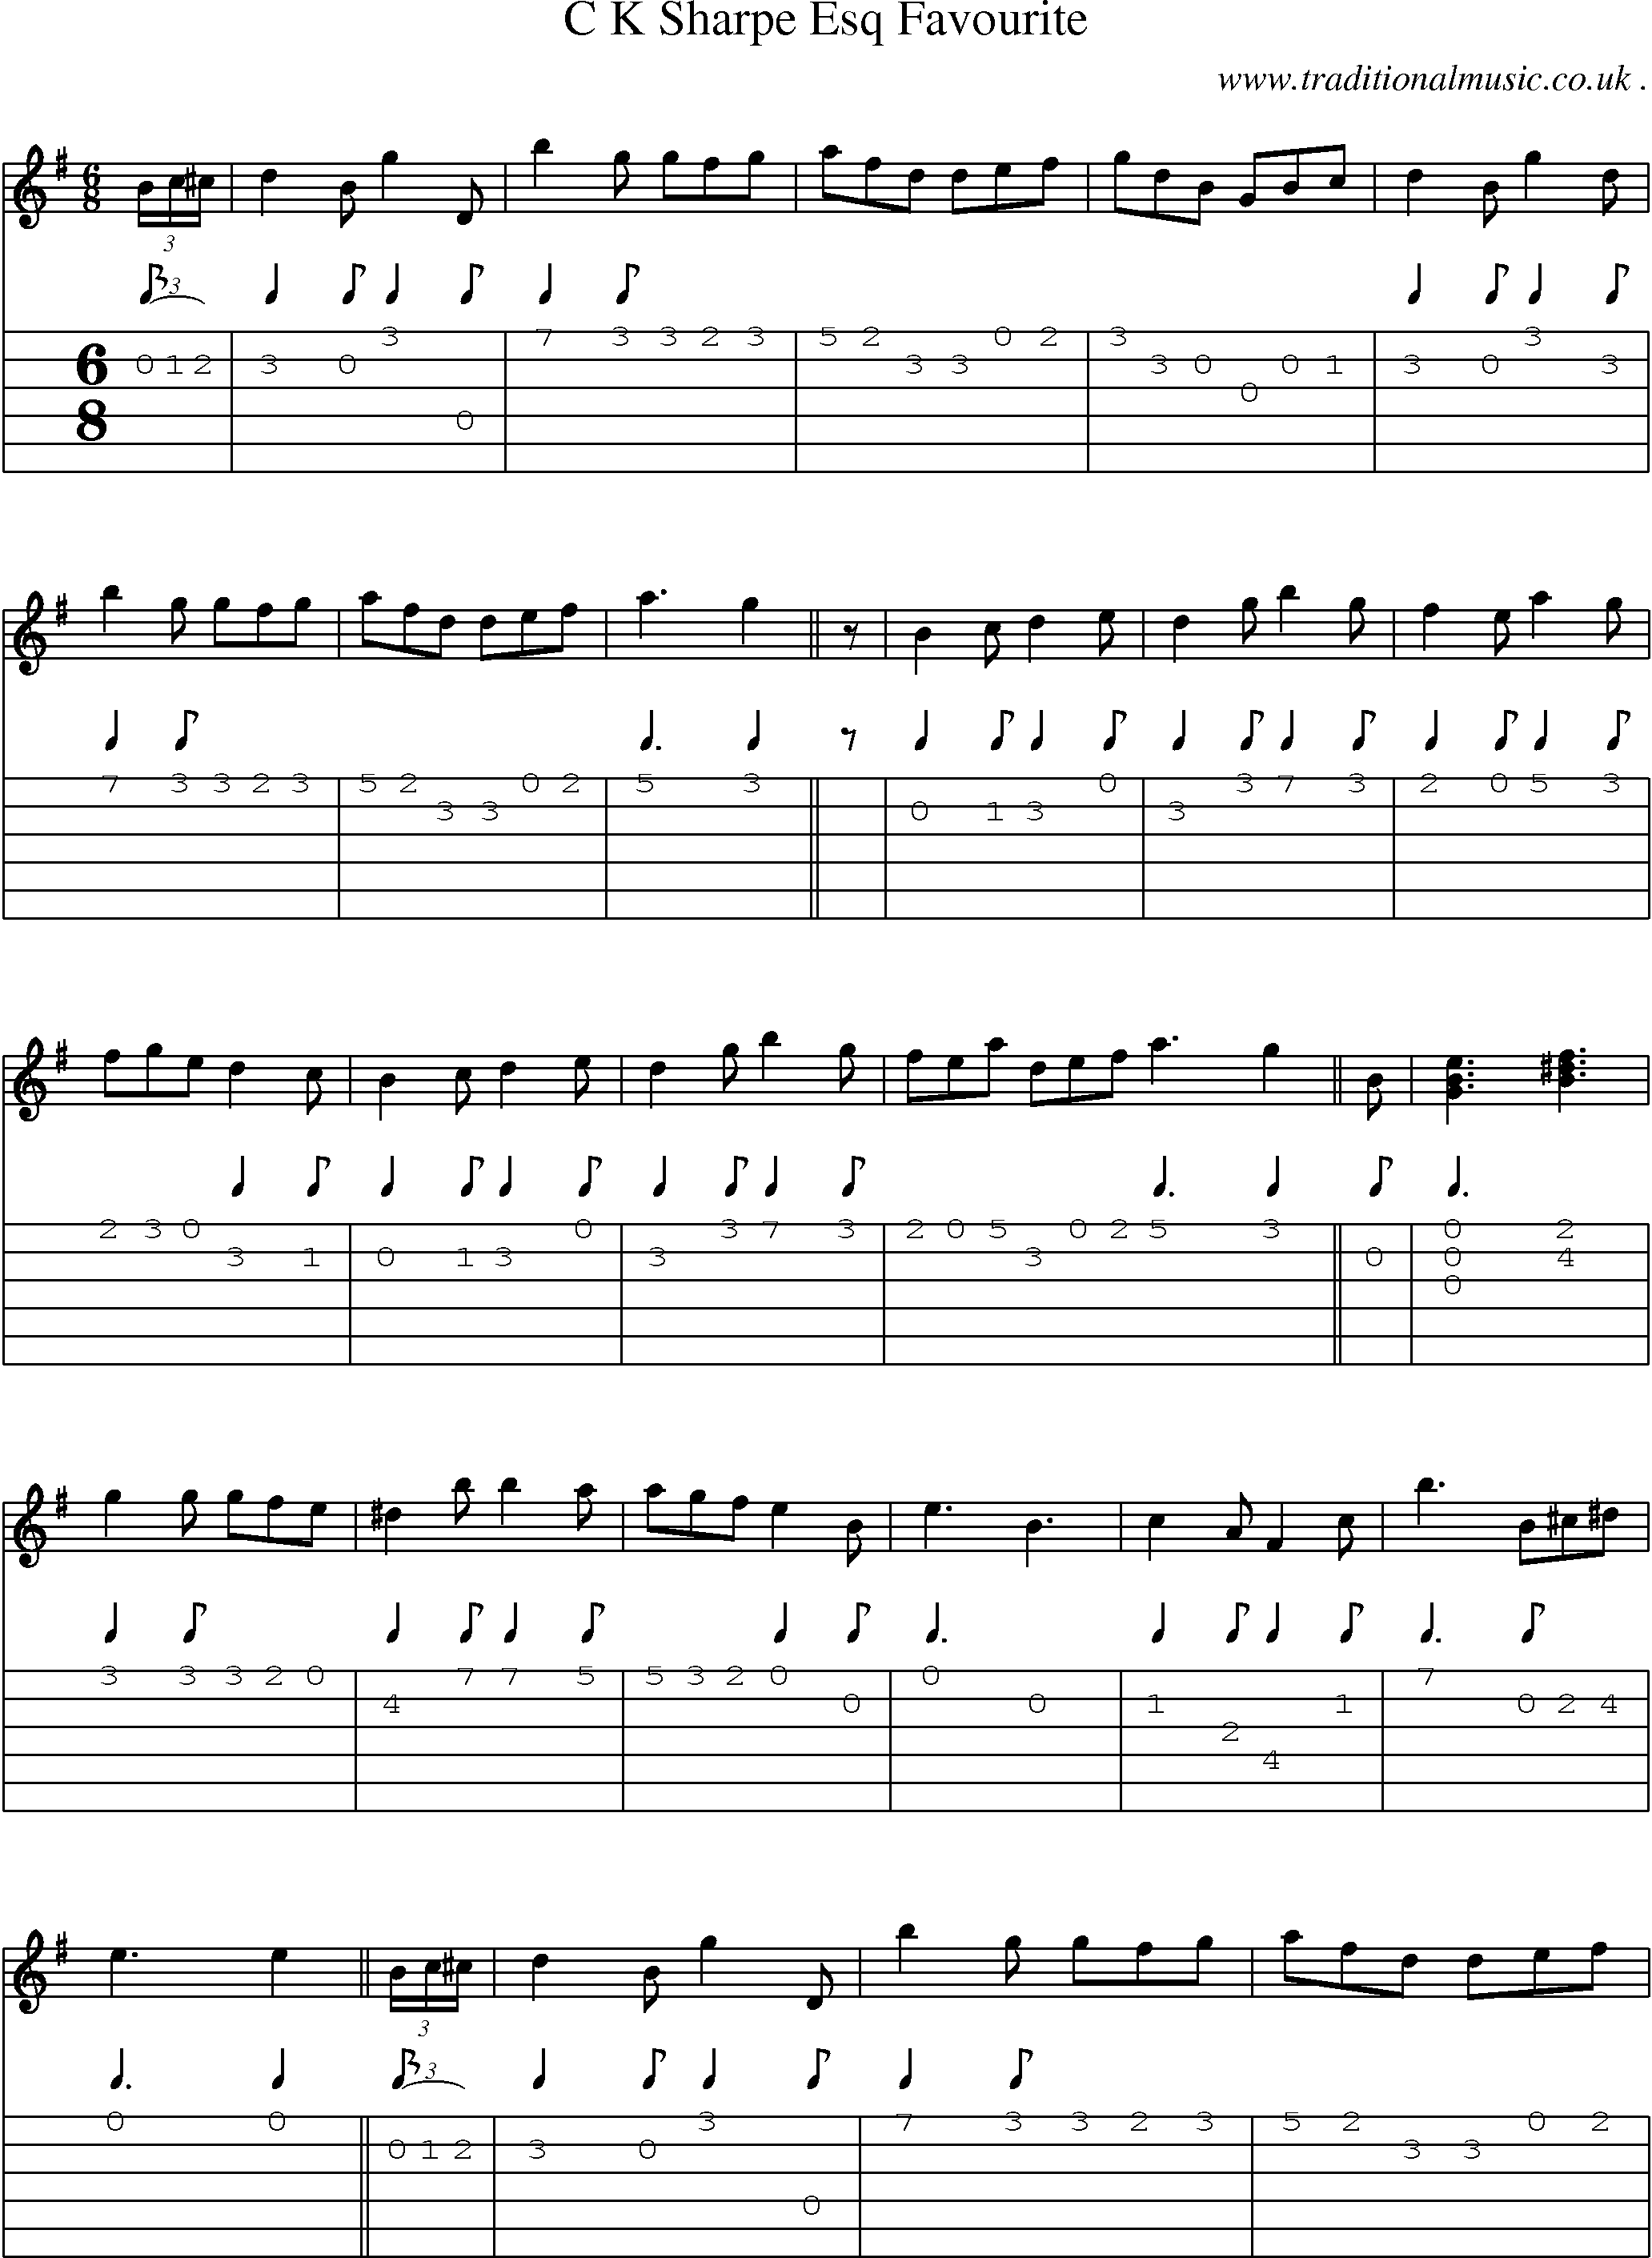 Sheet-music  score, Chords and Guitar Tabs for C K Sharpe Esq Favourite